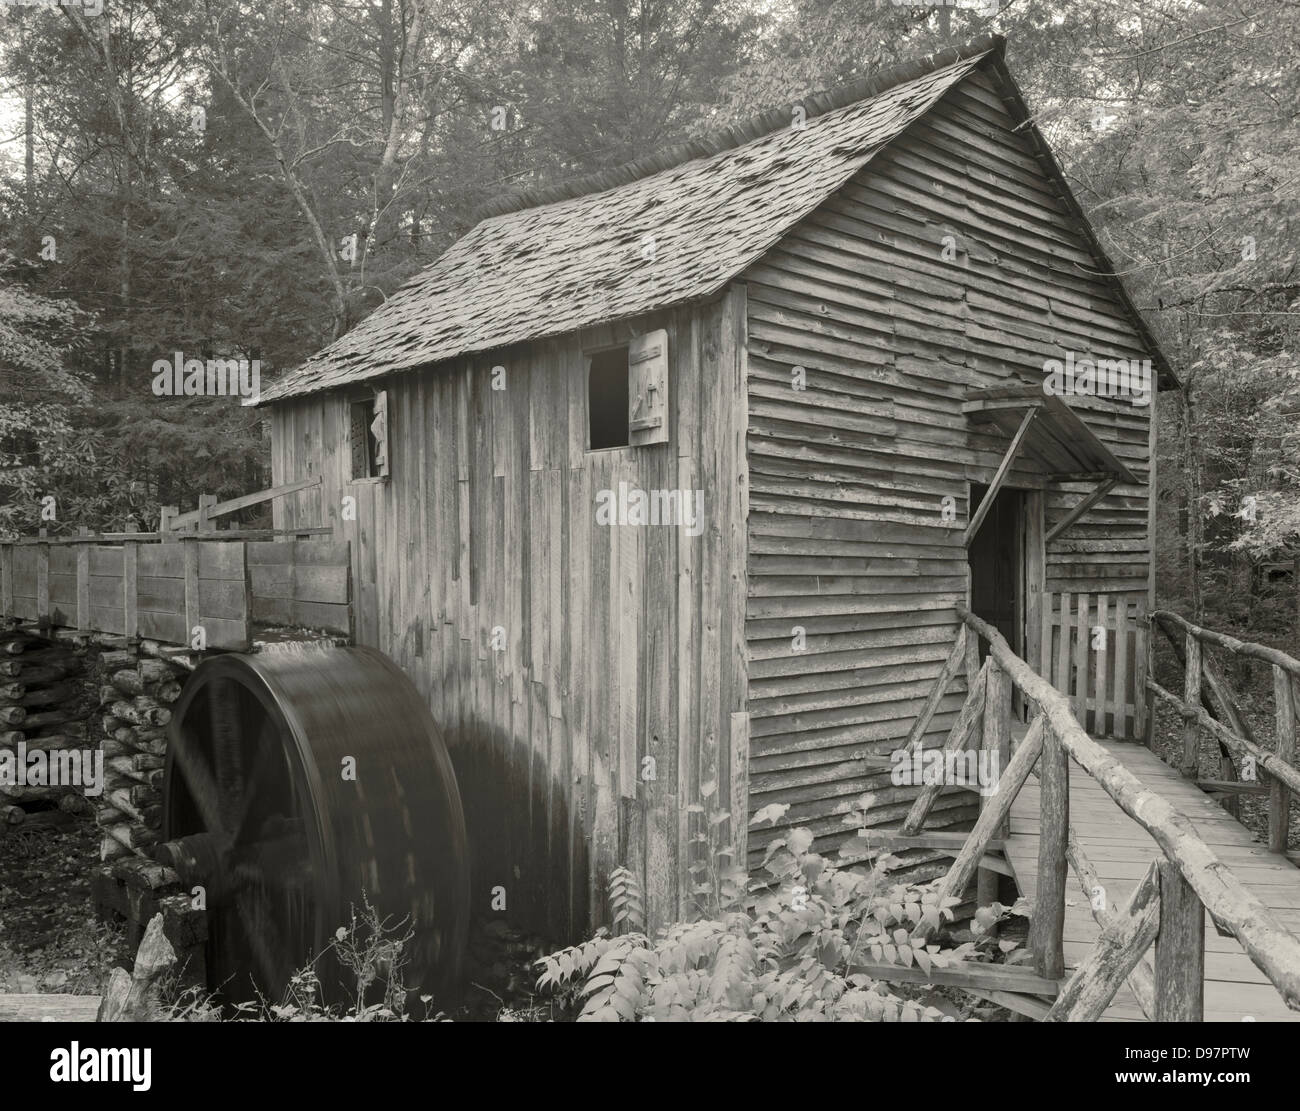 The John Cable Grist Mill in Cades Cove, Great Smoky Mountains National Park, Tennessee. The mill is still operational. Stock Photo